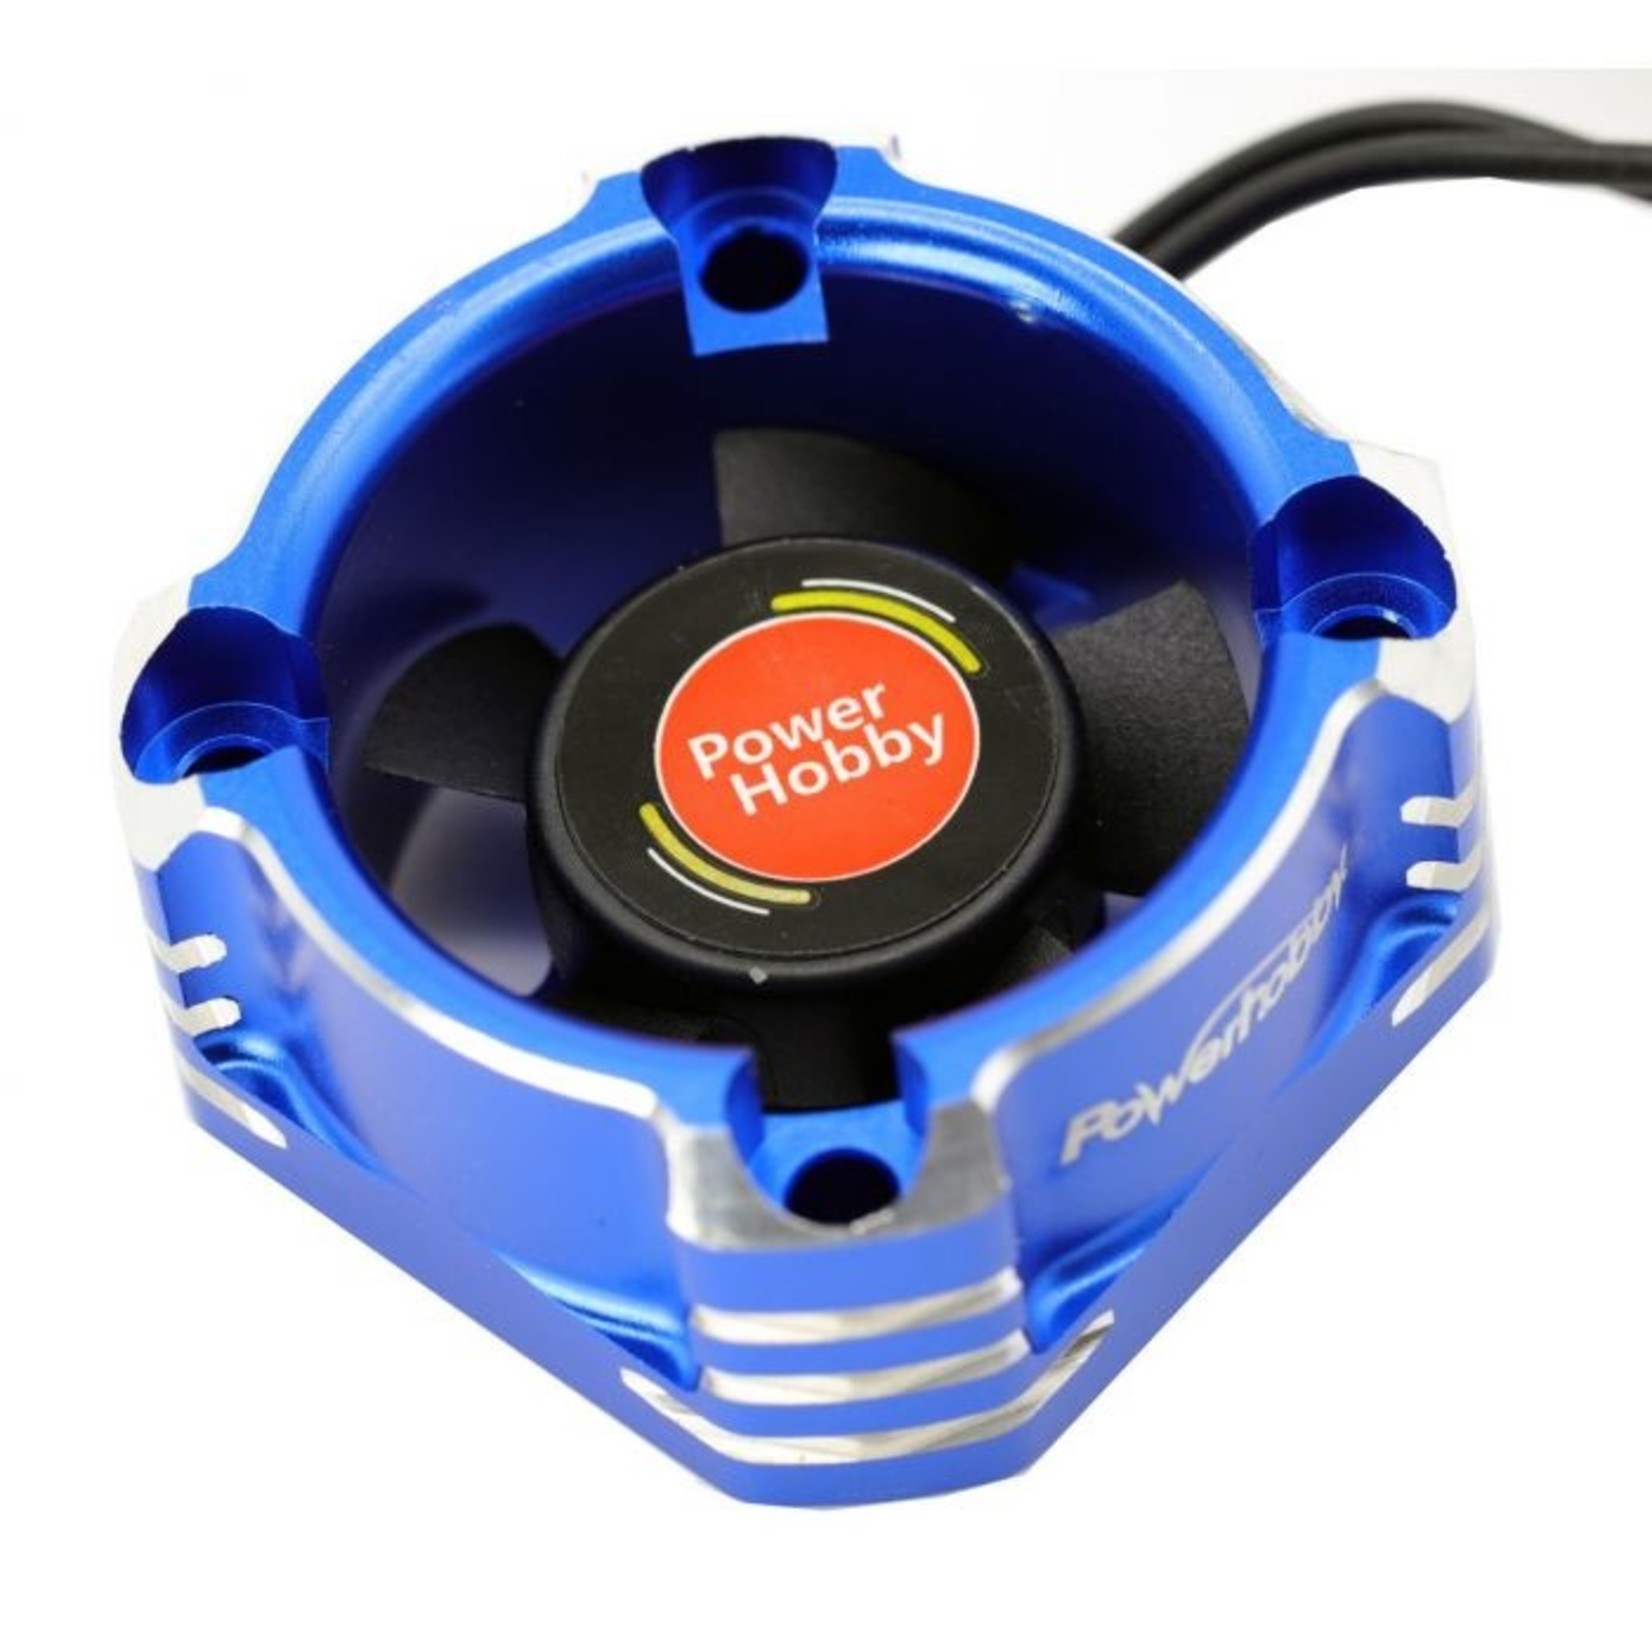 Power Hobby PHBPHF3033BLUE   Booster 30x30 High Speed Aluminum RC Cooling Fan